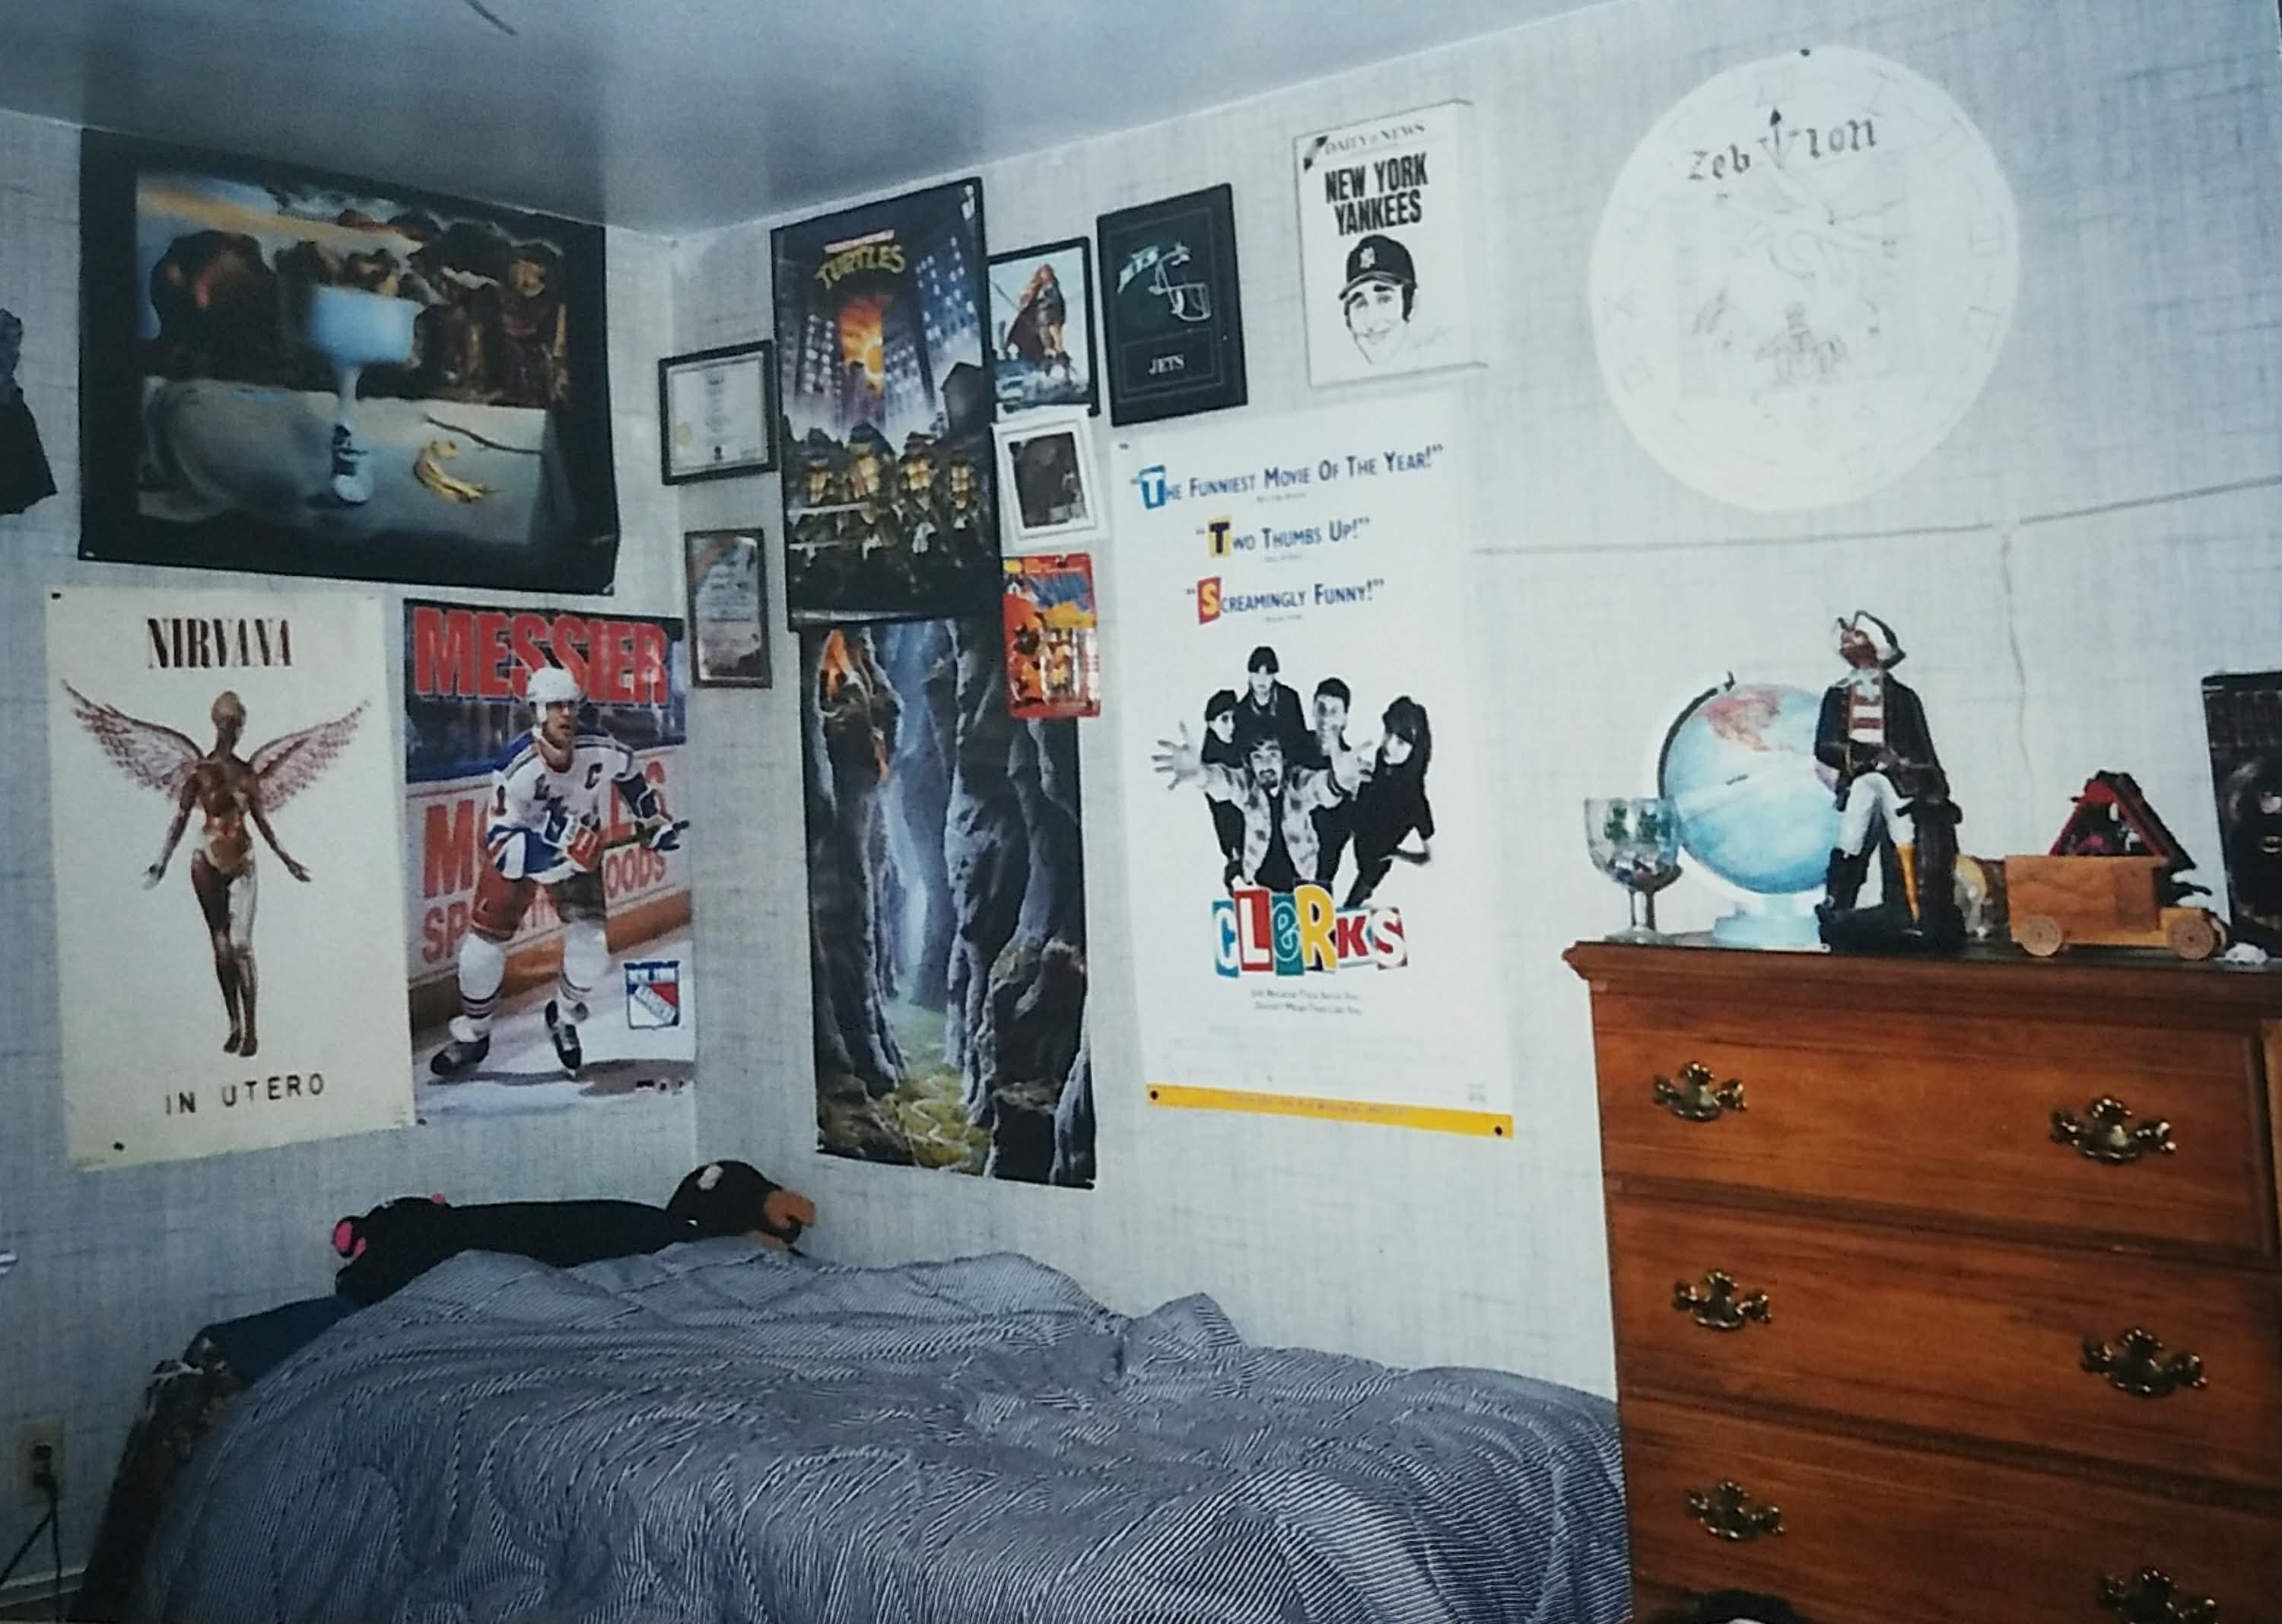 90's Vr Bedroom</a><br> by <a href='/profile/Bling-King/'>Bling King</a>